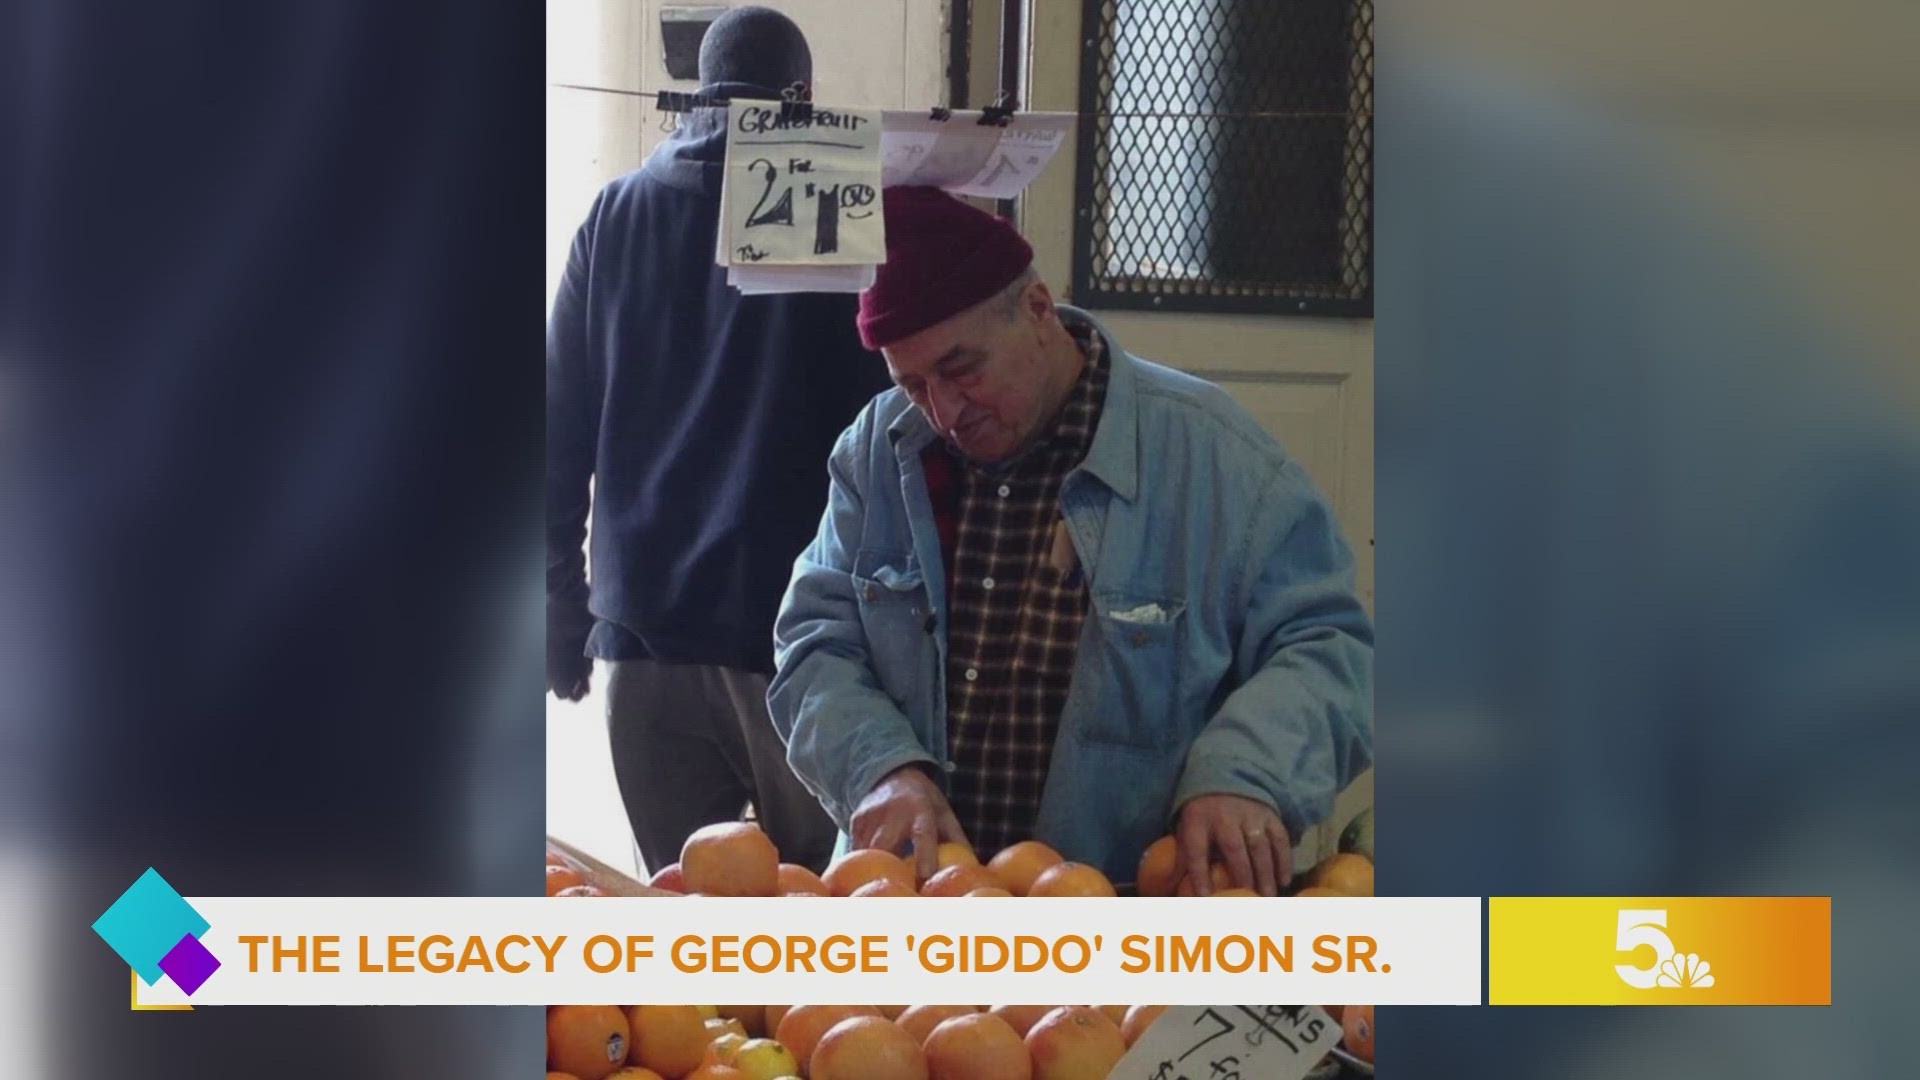 Giddo Simon Ministries strives to support the underserved in our community with fresh produce. This mission started with one man and a big heart.